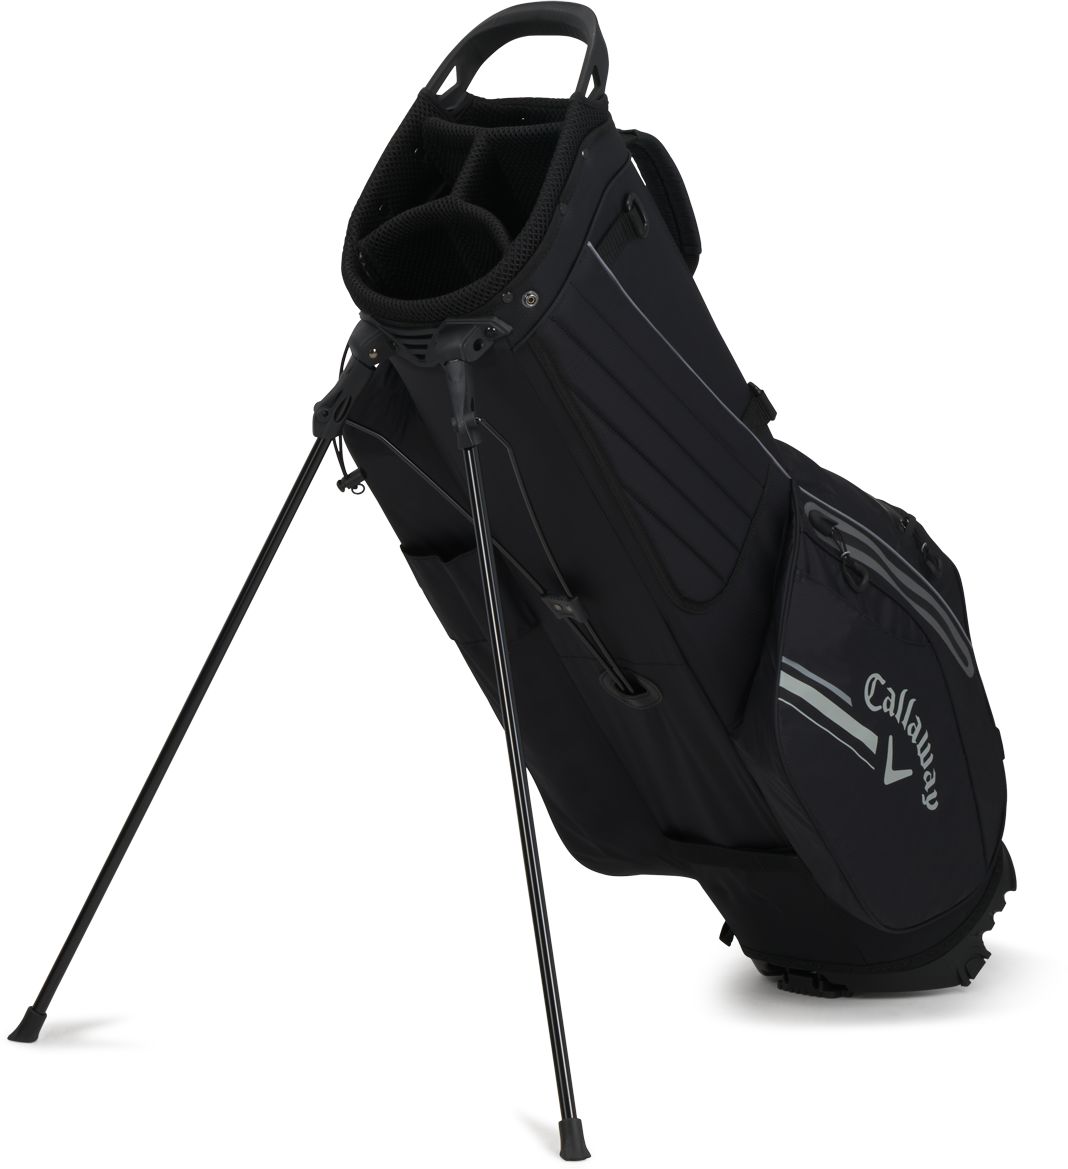 CALLAWAY, CHEV DRY STAND BAG